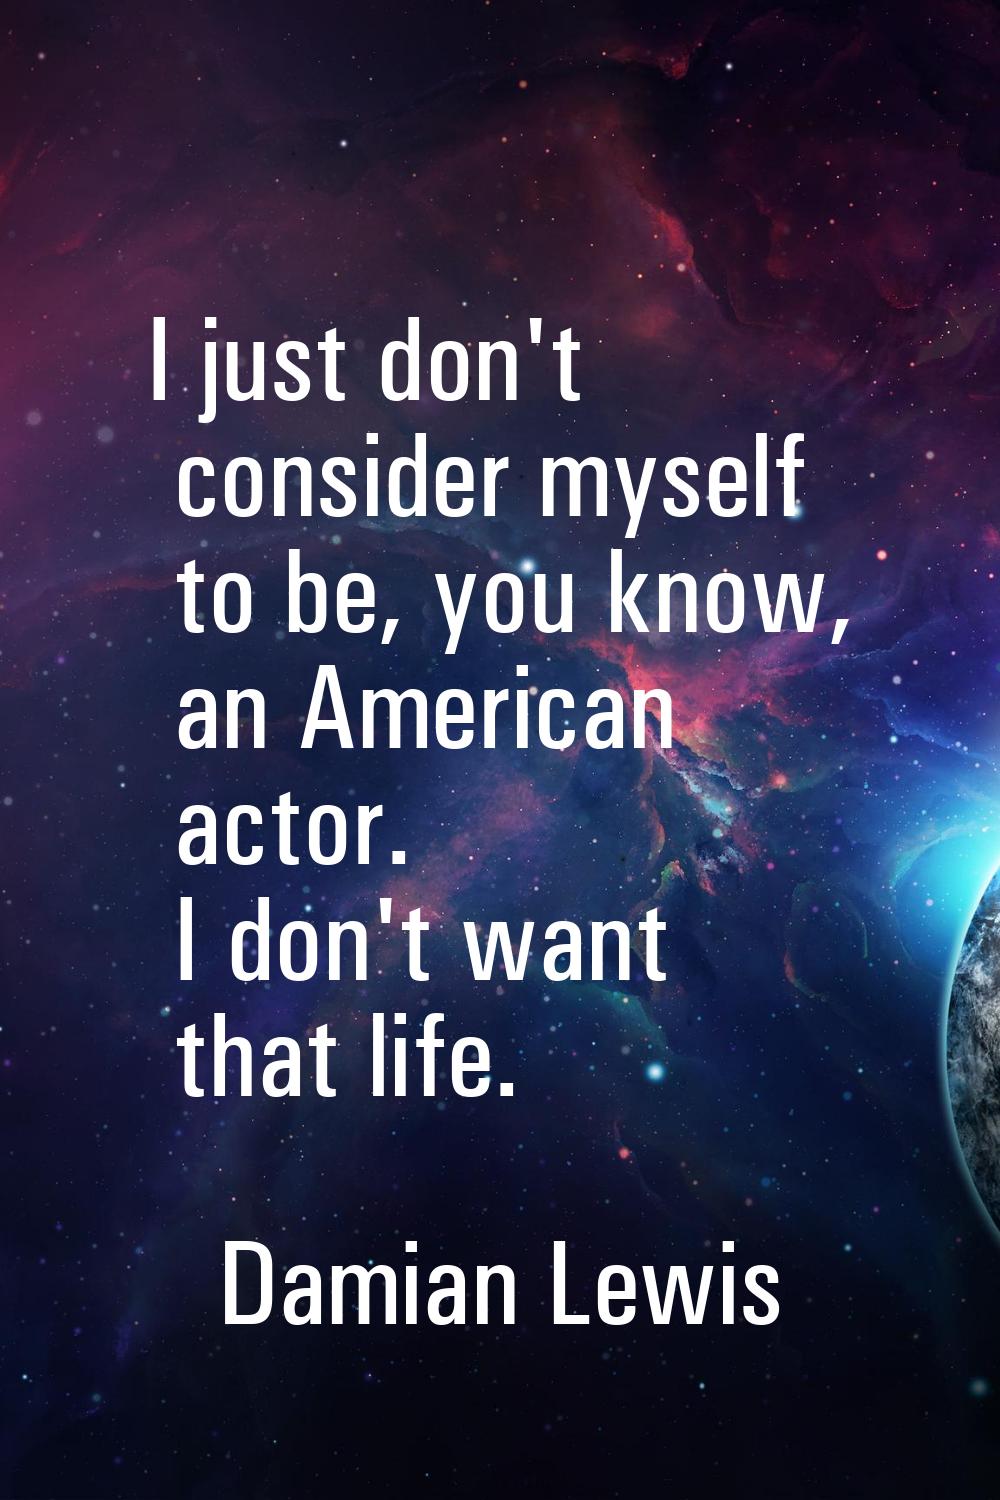 I just don't consider myself to be, you know, an American actor. I don't want that life.